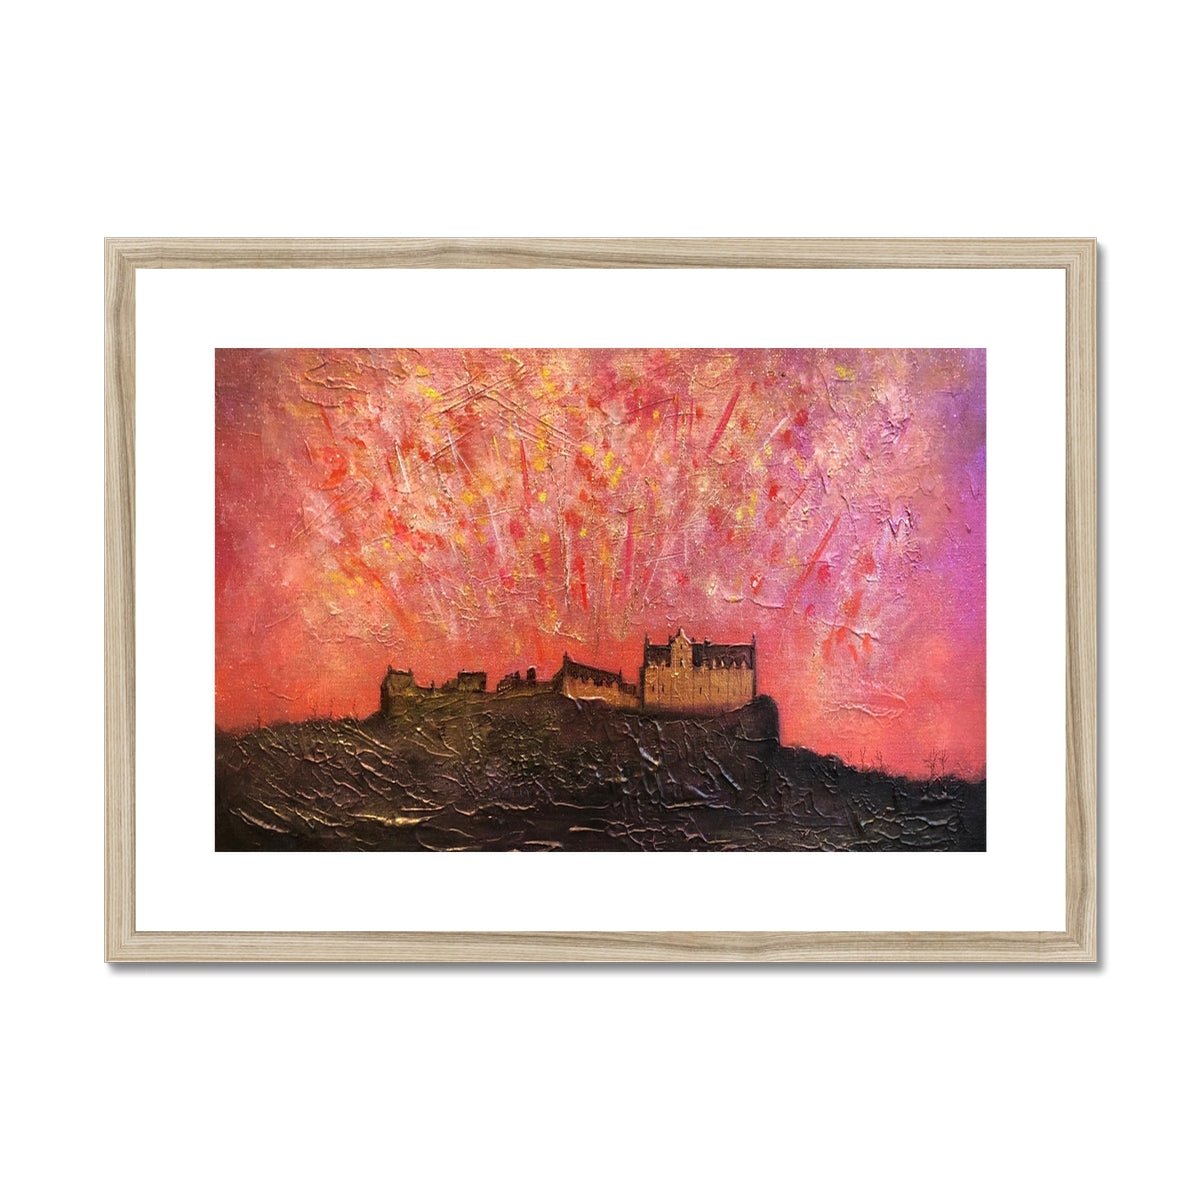 Edinburgh Castle Fireworks Painting | Framed & Mounted Prints From Scotland-Framed & Mounted Prints-Historic & Iconic Scotland Art Gallery-A2 Landscape-Natural Frame-Paintings, Prints, Homeware, Art Gifts From Scotland By Scottish Artist Kevin Hunter